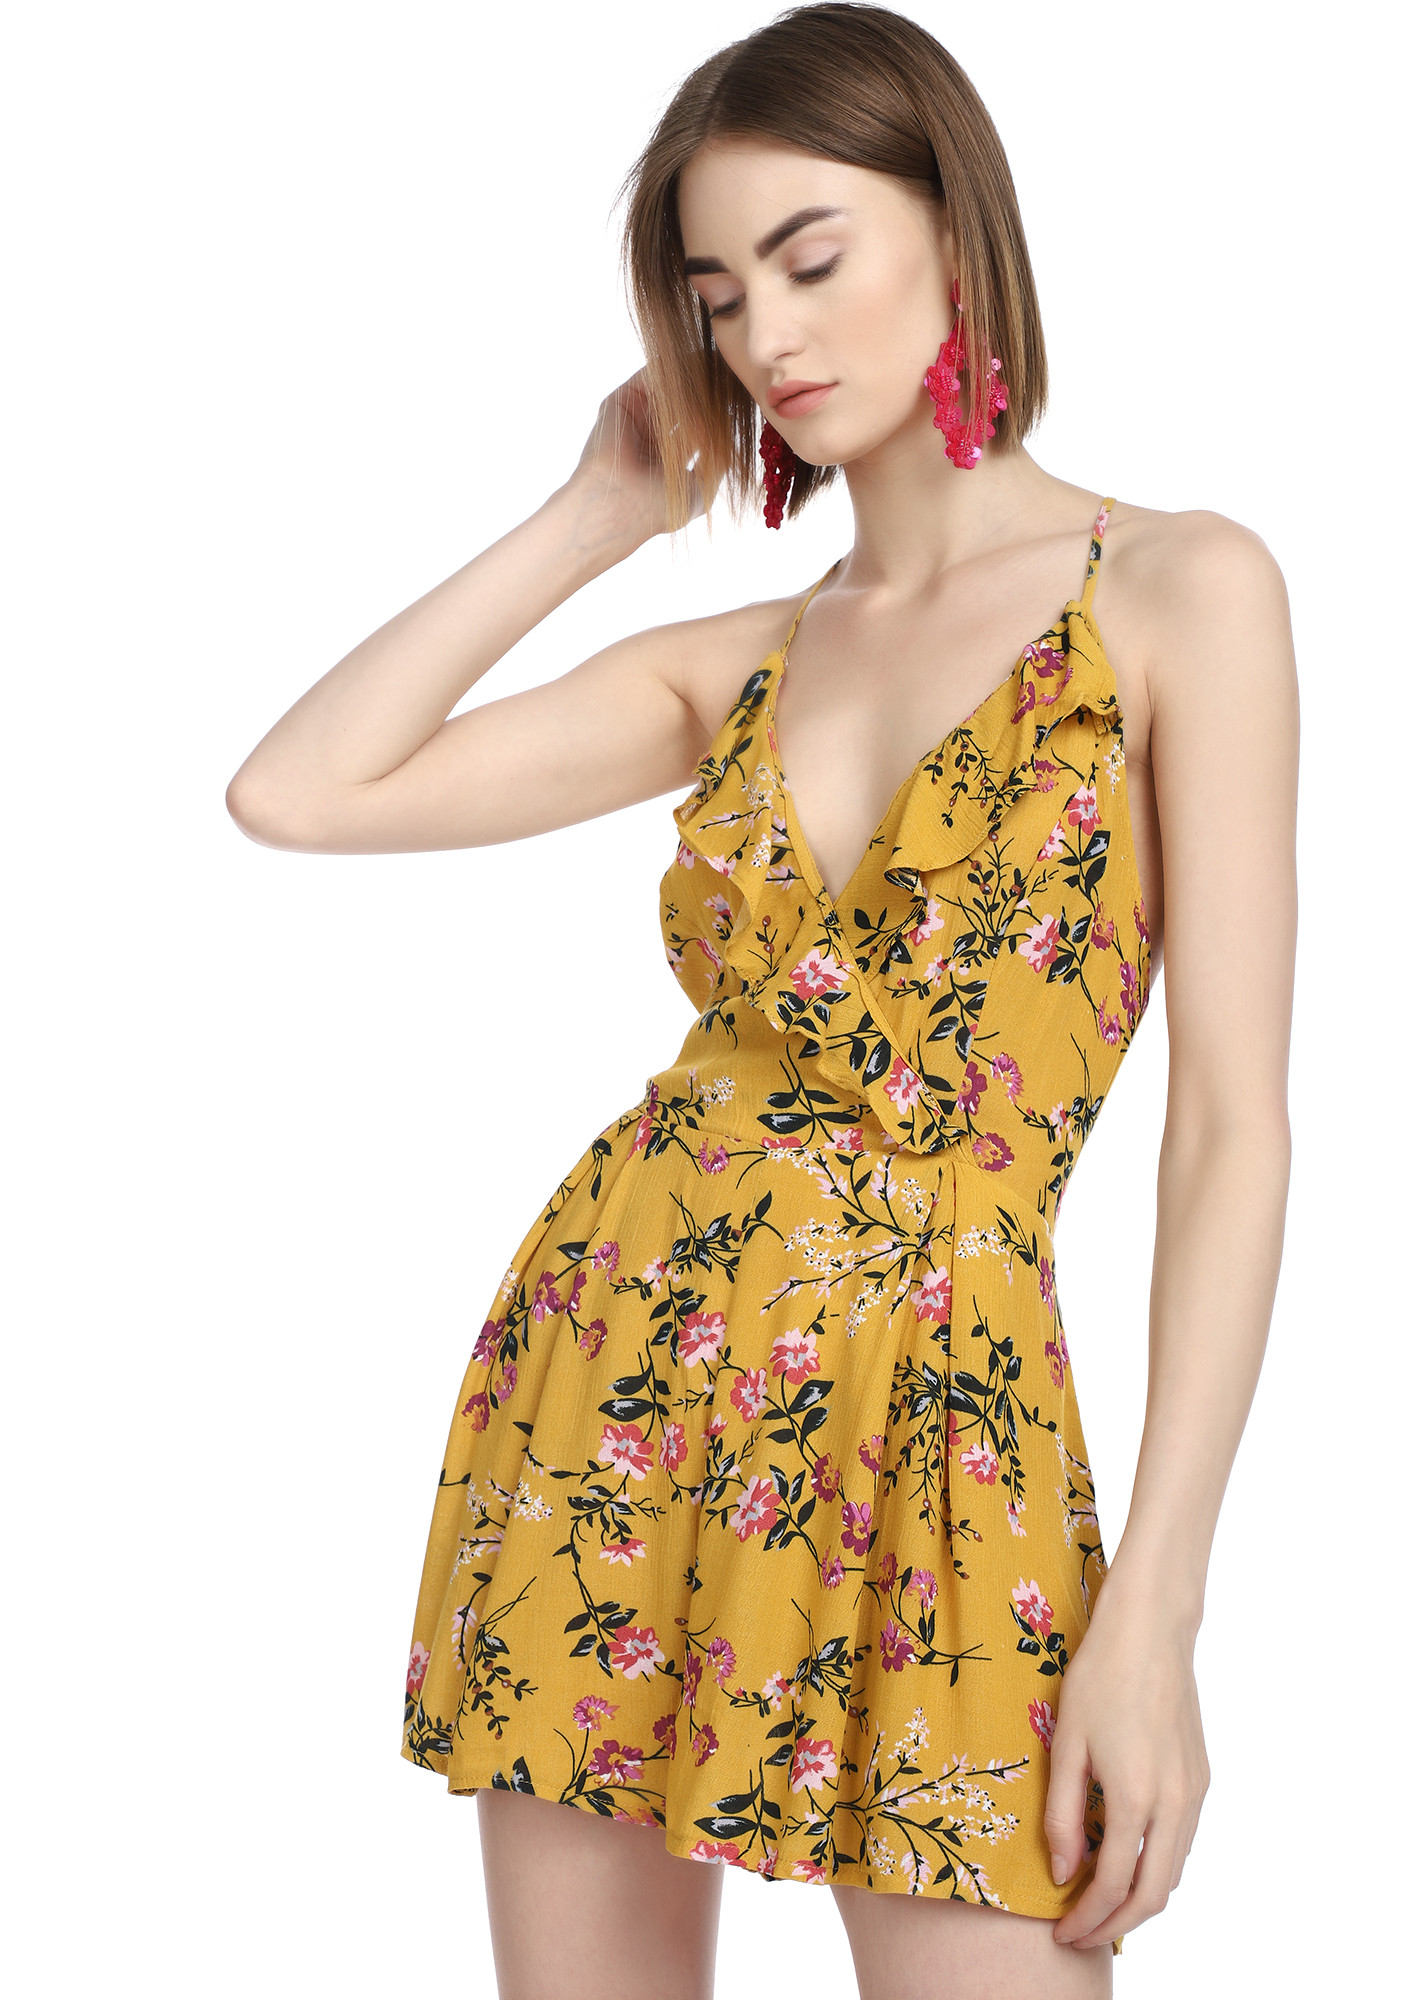 FLOWER ME WITH LOVE YELLOW ROMPER